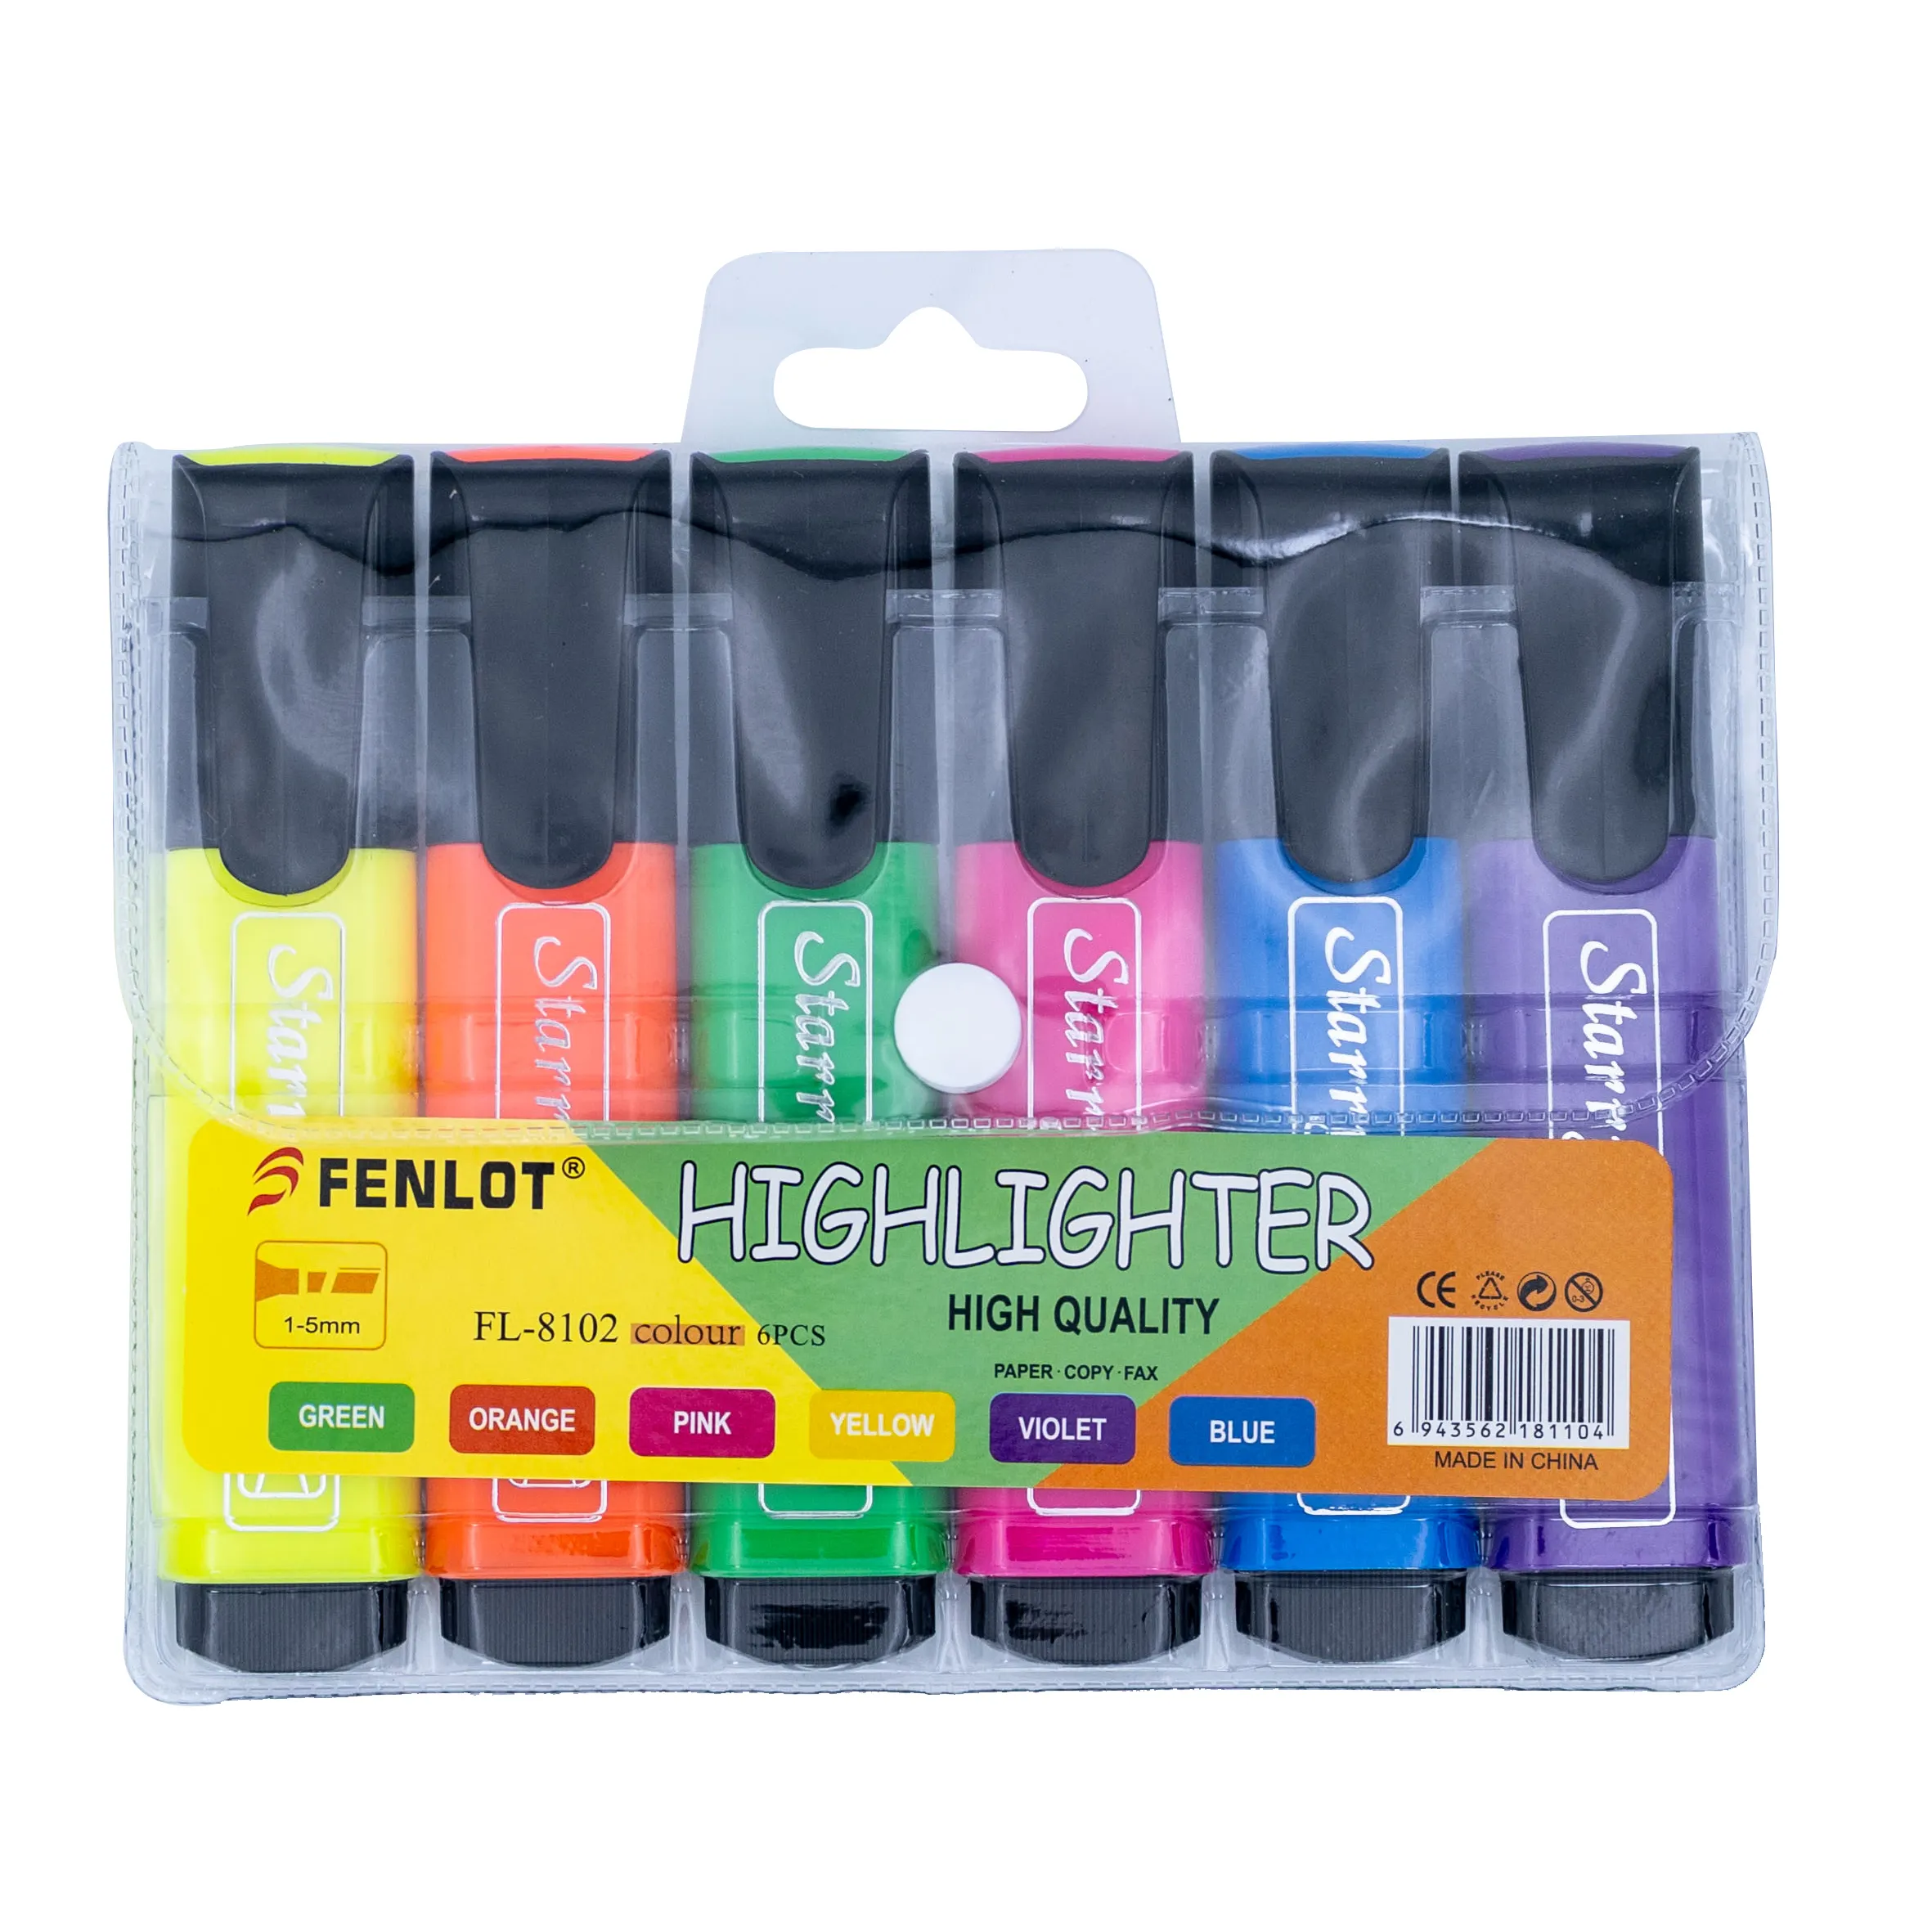 RTS 6pcs/PVC bag OEM/ODM acceptable supplier neon colorful normal size highlighter marker highlighter pen set with clip